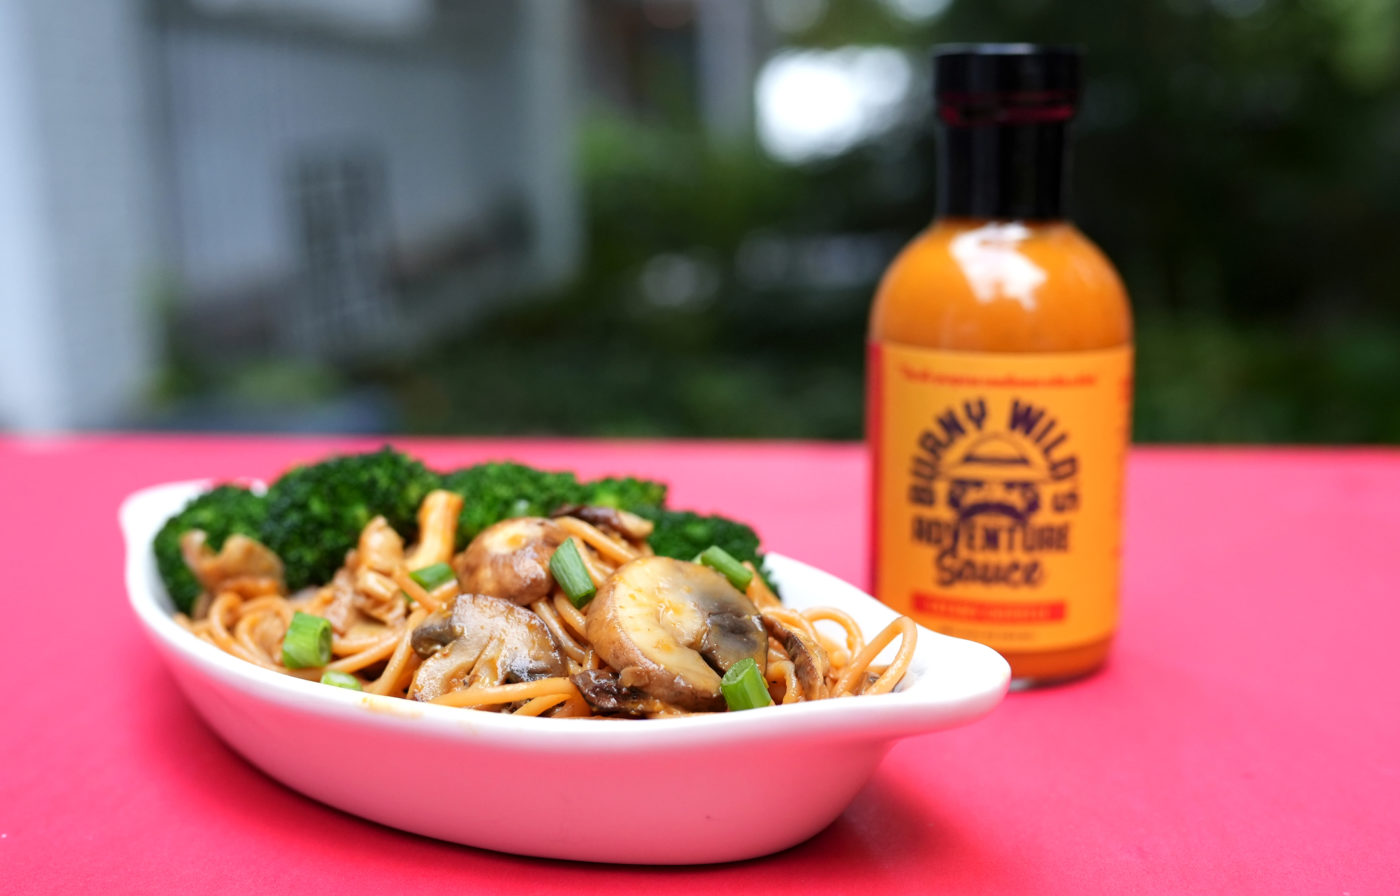 Burny Wild's Adventure Sauce tossed within pad thai, adding the perfect amount of heat to any dish. Raleigh's favorite 